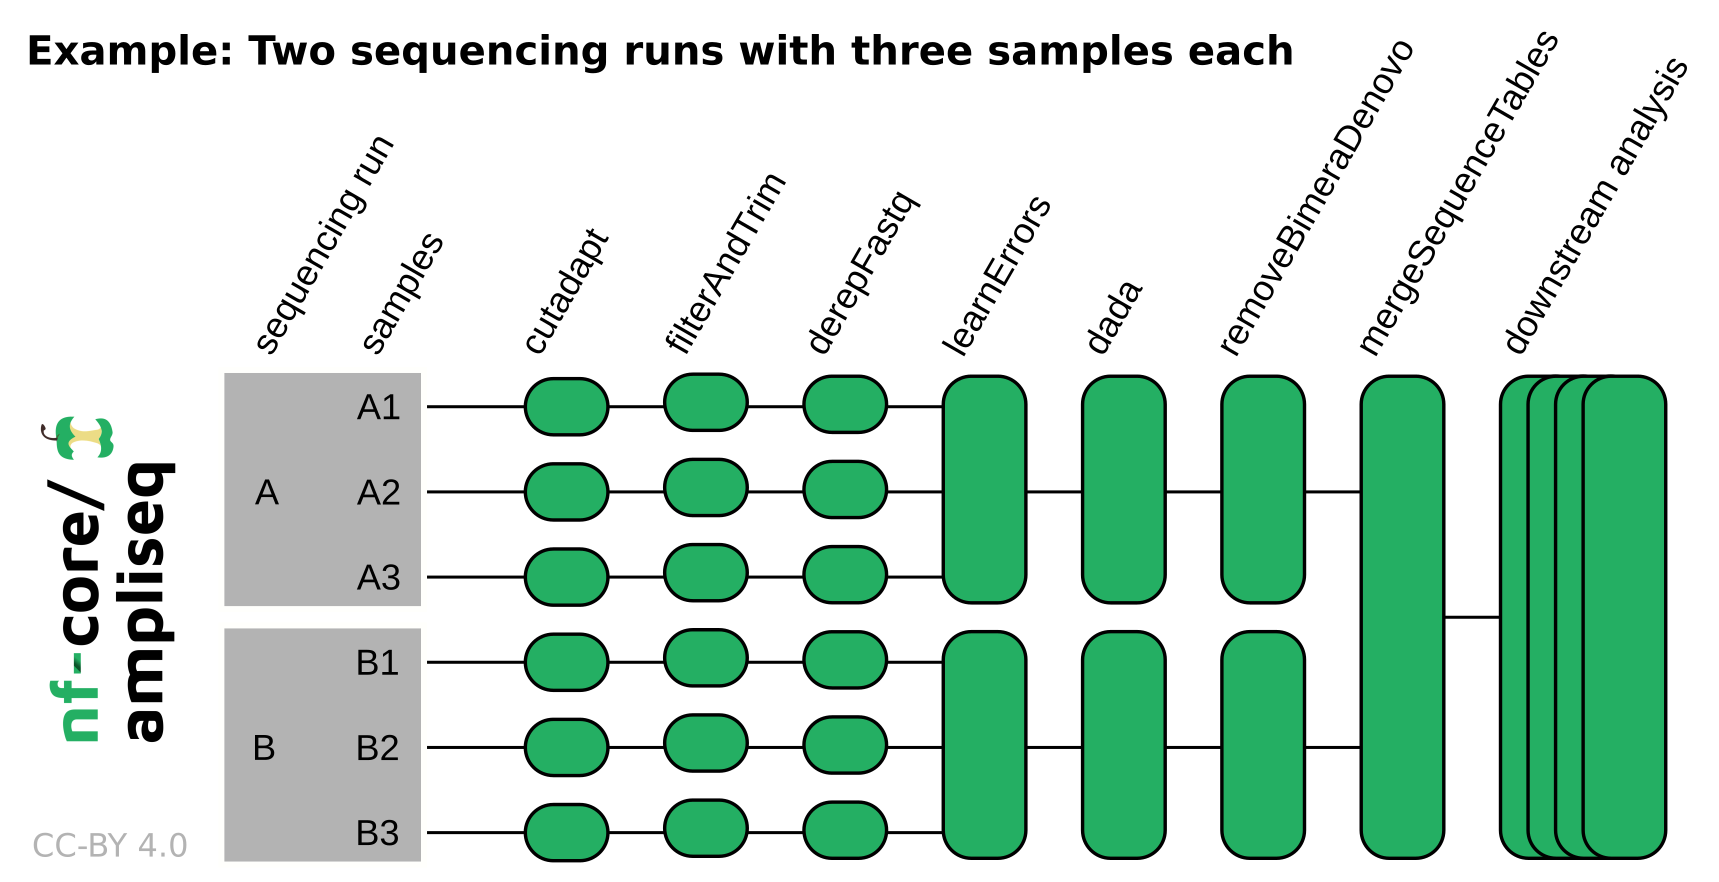 nf-core/ampliseq workflow overview with --multiple_sequencing_runs